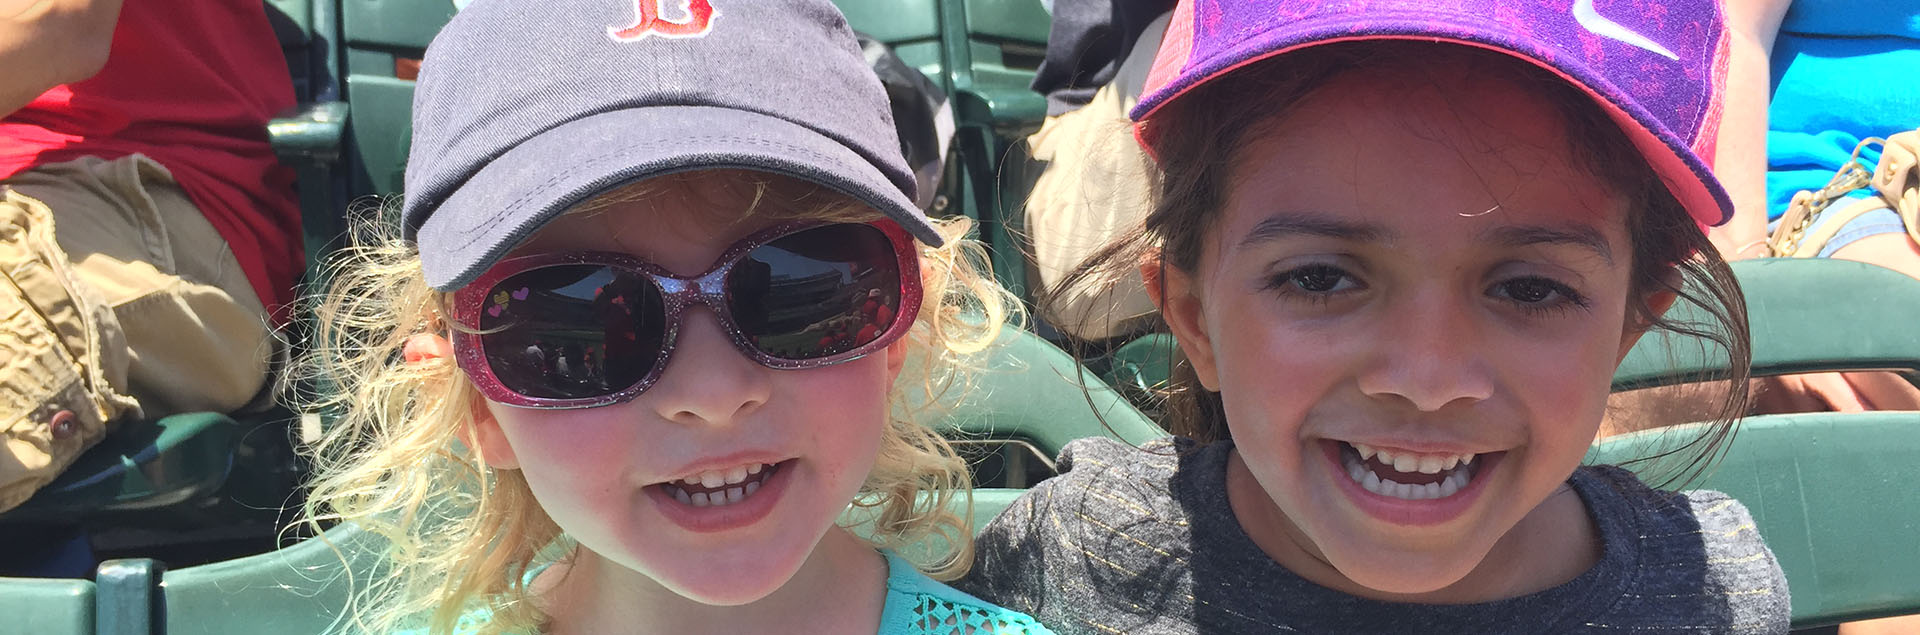 Little girls in stands at baseball game